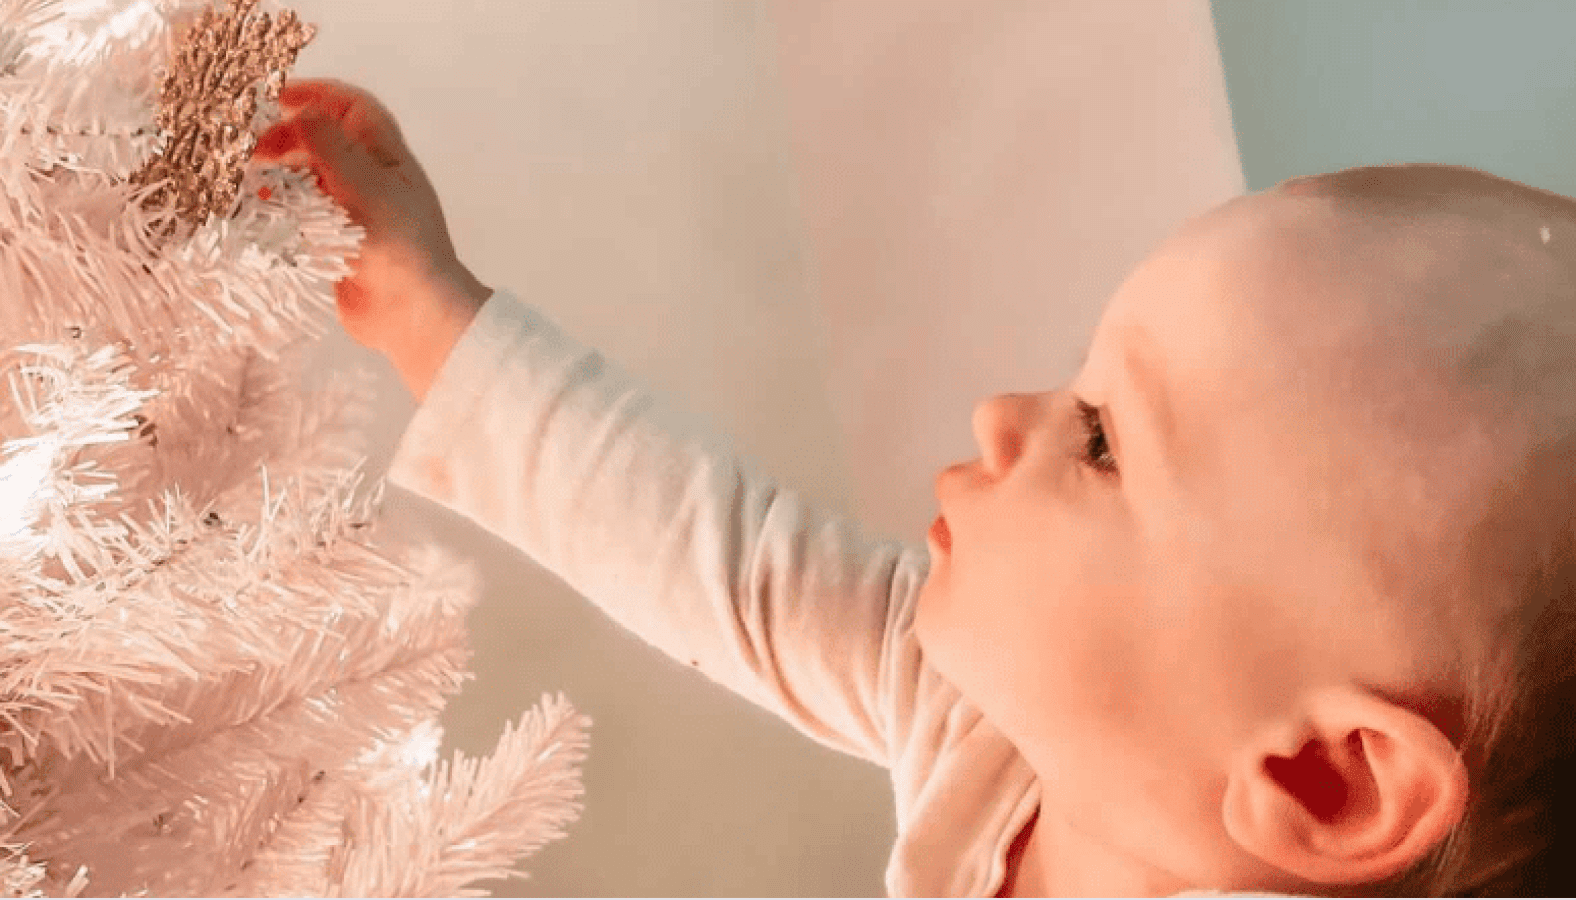 Image from Comfort and Joy - Baby touching a Christmas Tree